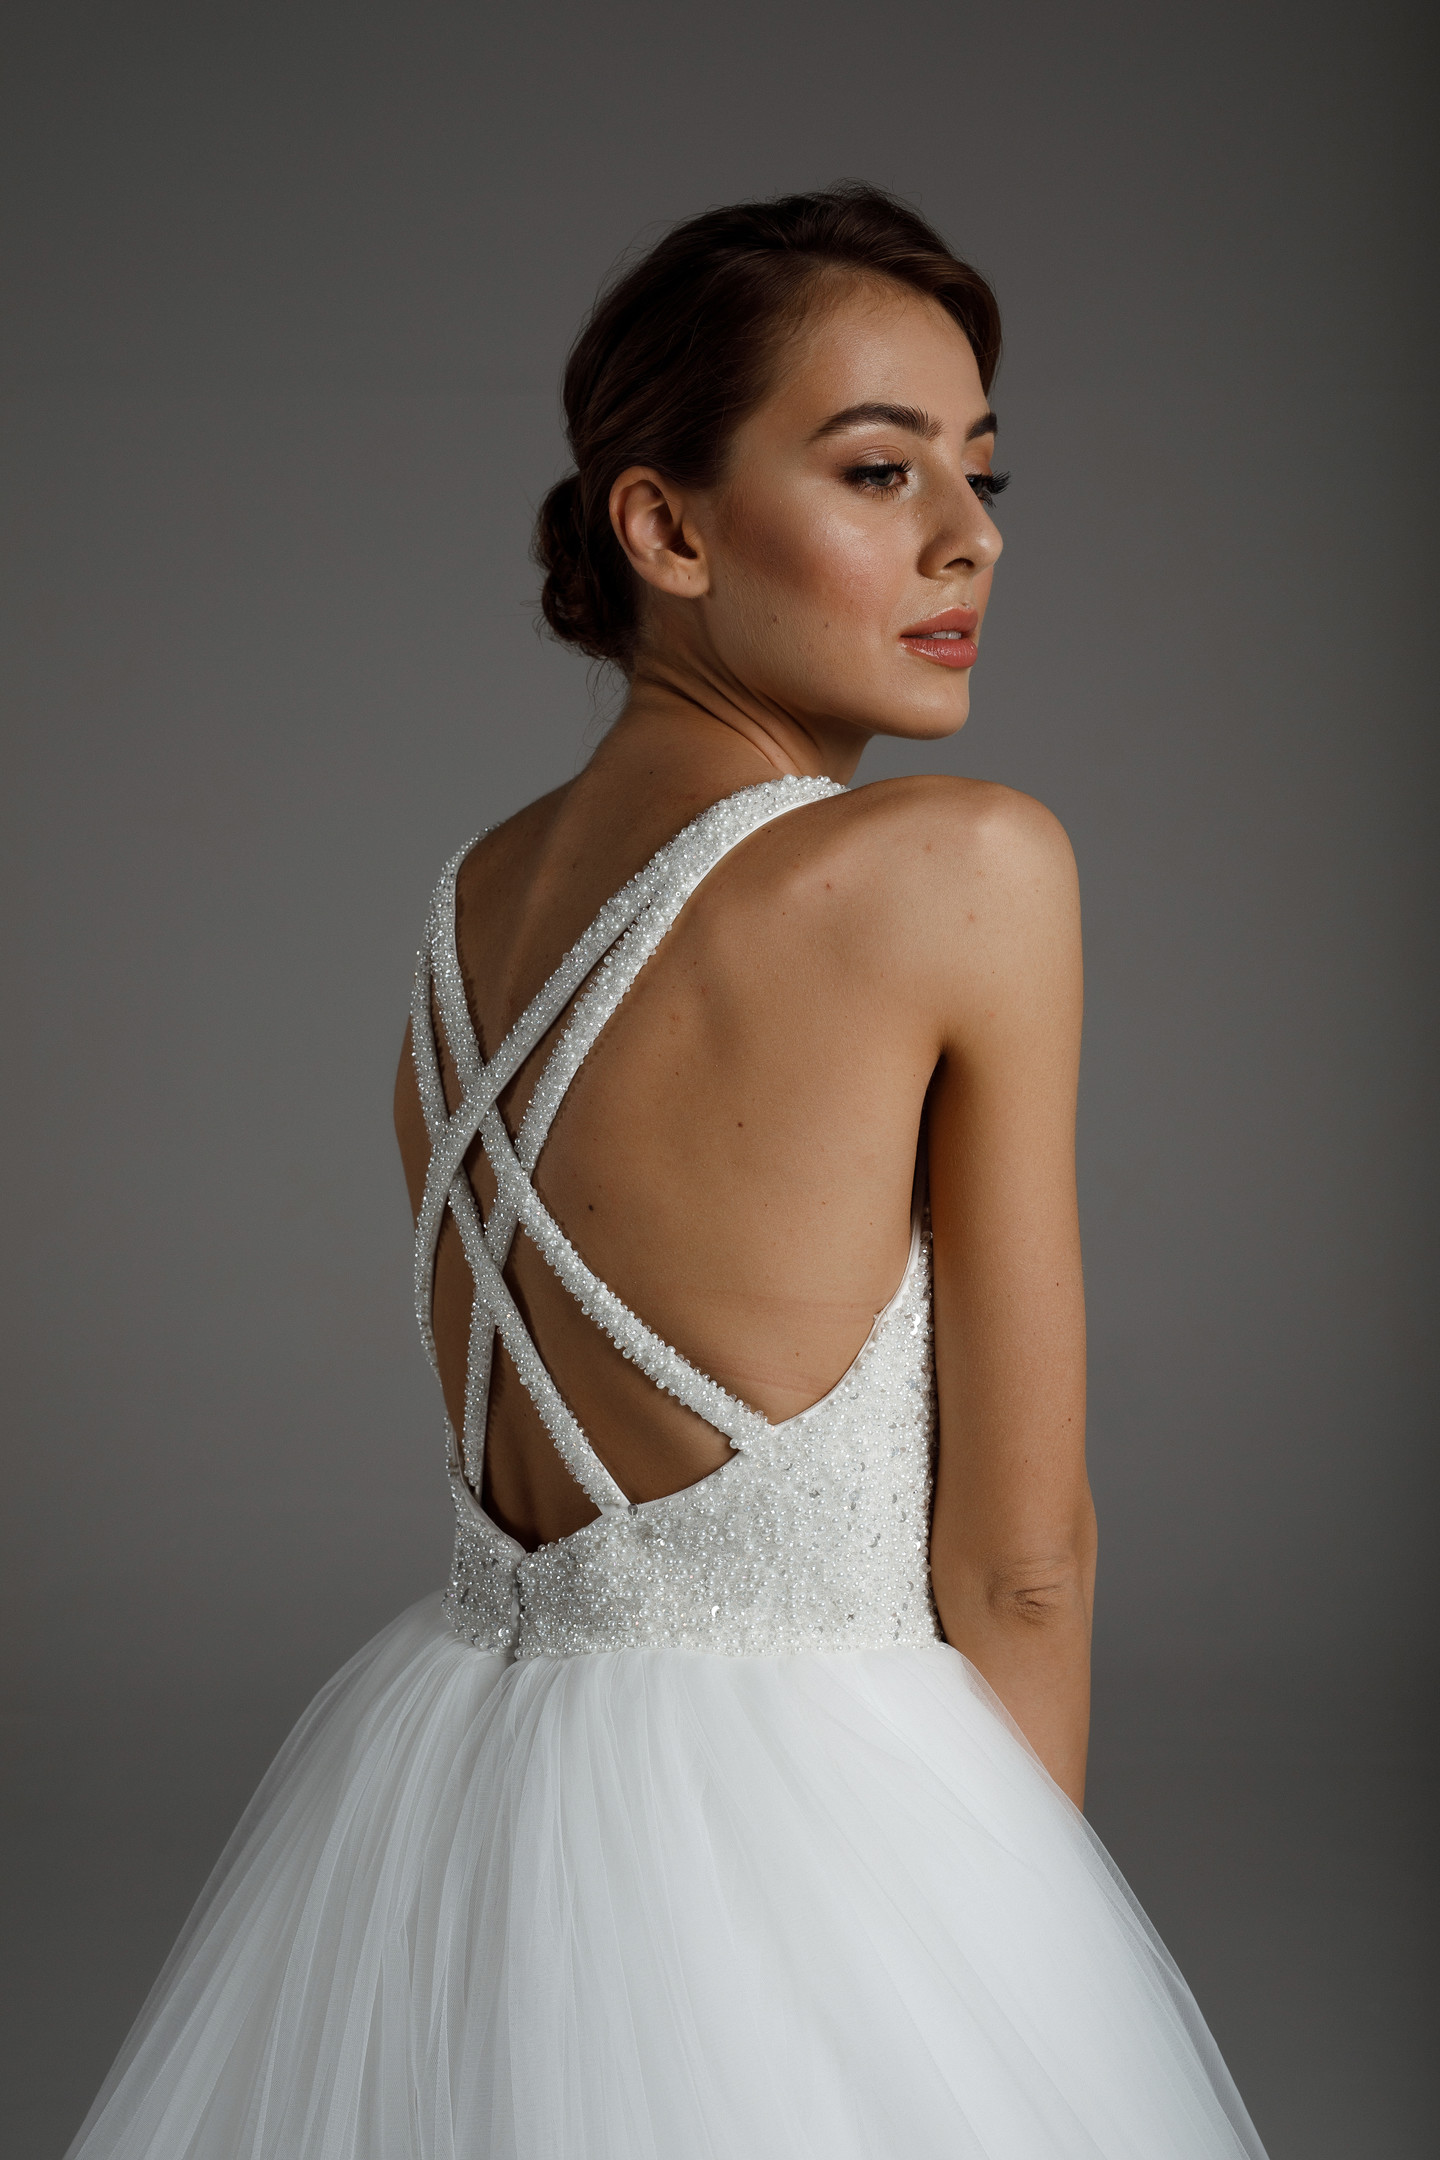 Esmeralda gown, 2020, couture, dress, bridal, off-white, tulle, embroidery, A-line, archive